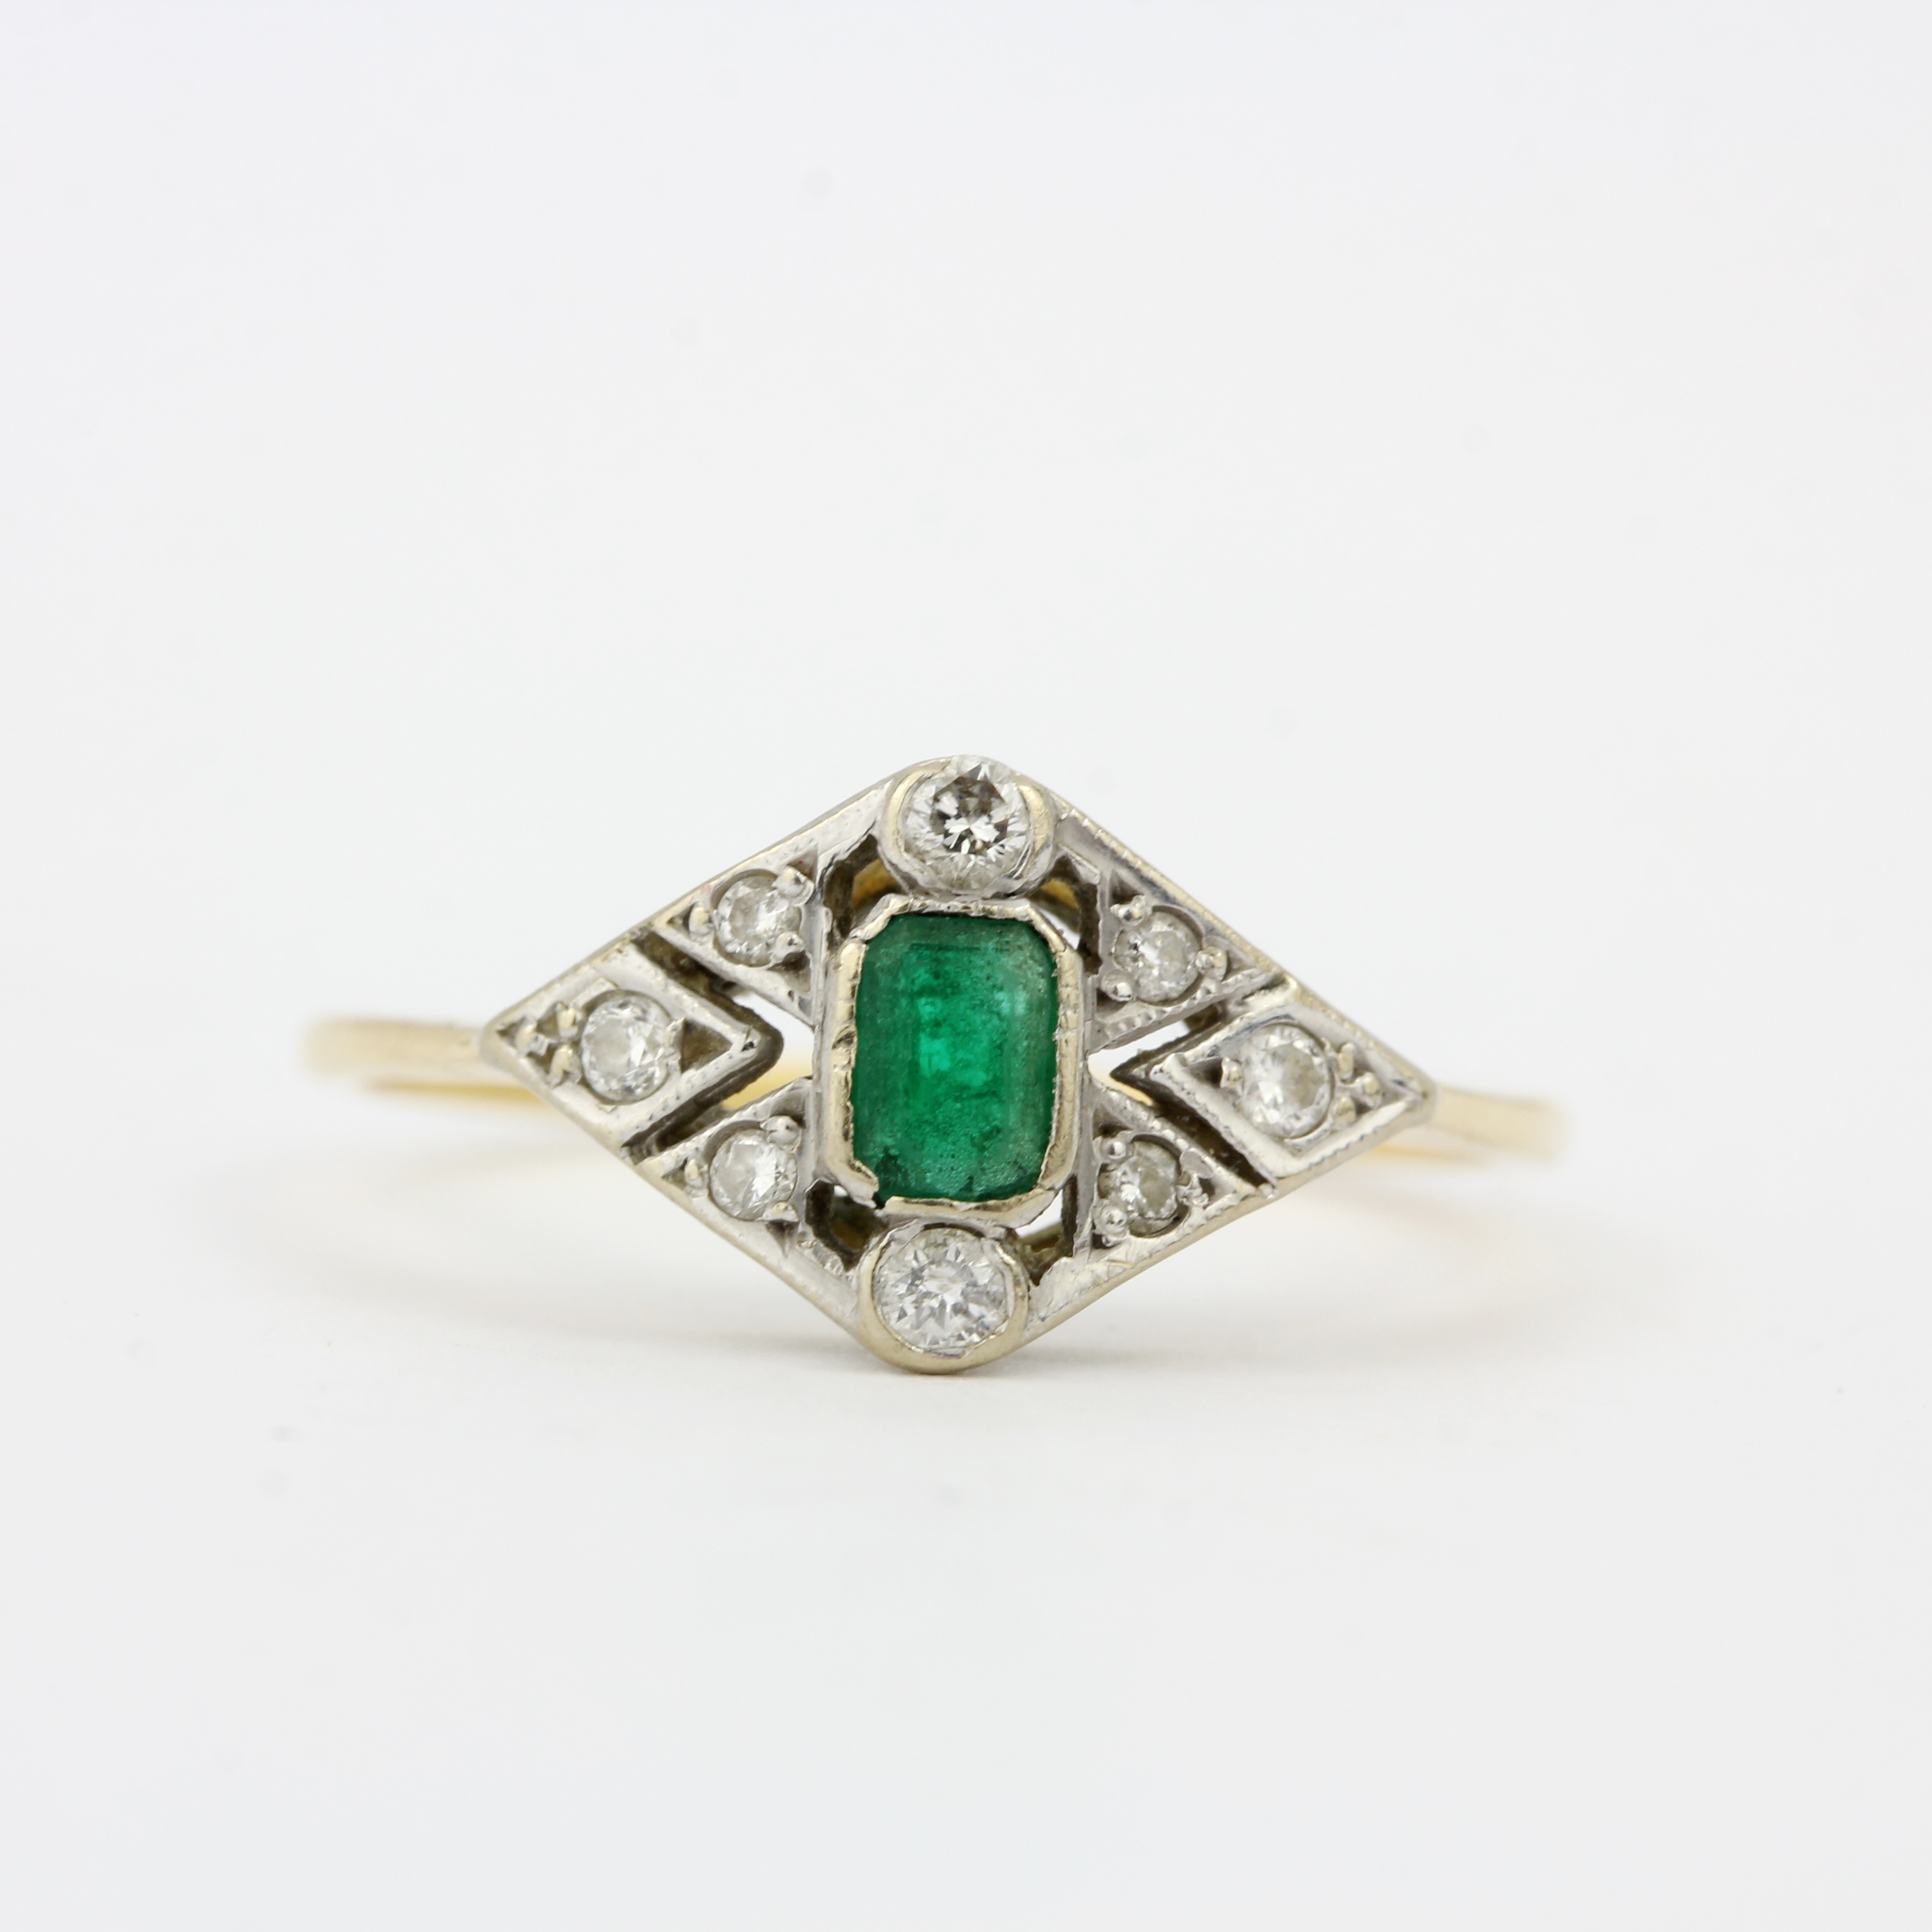 An Art Deco 18ct gold and platinum (worn hallmarks) ring set with diamonds and an emerald cut - Image 2 of 3